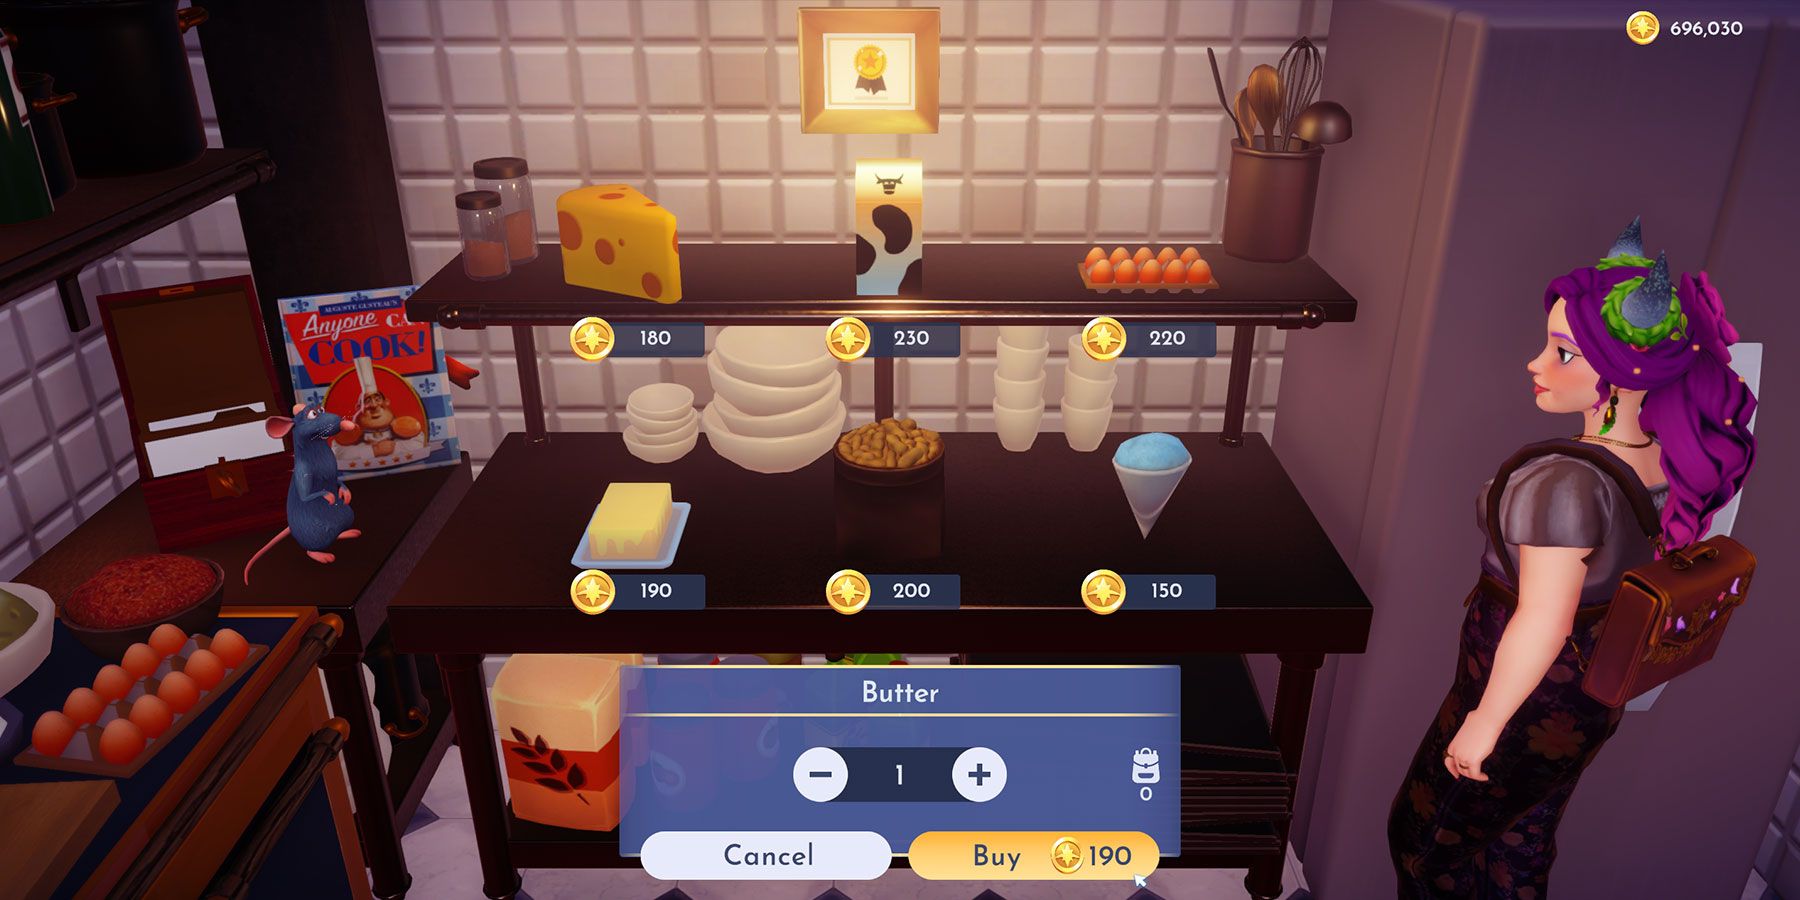 Buying butter at Remy's in Disney Dreamlight Valley